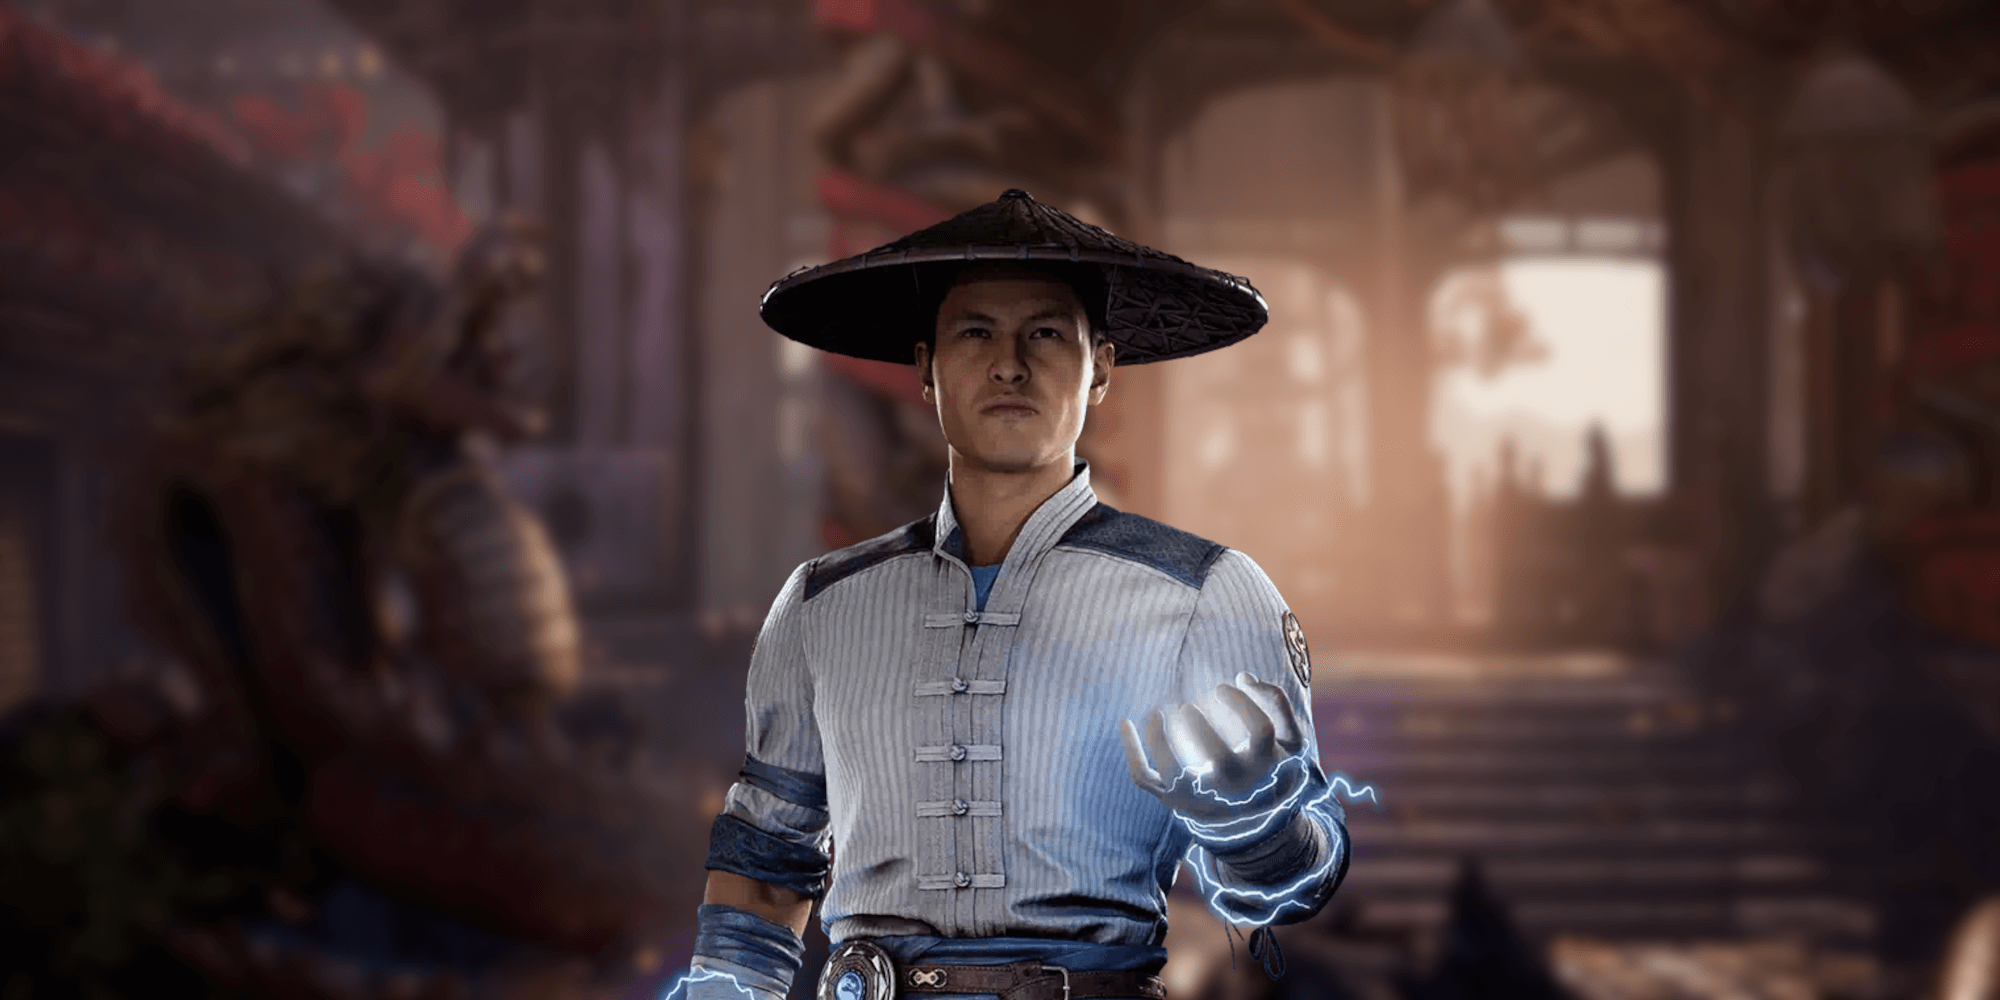 Mortal Kombat 1 Raiden Character Guide: All You Need to Know